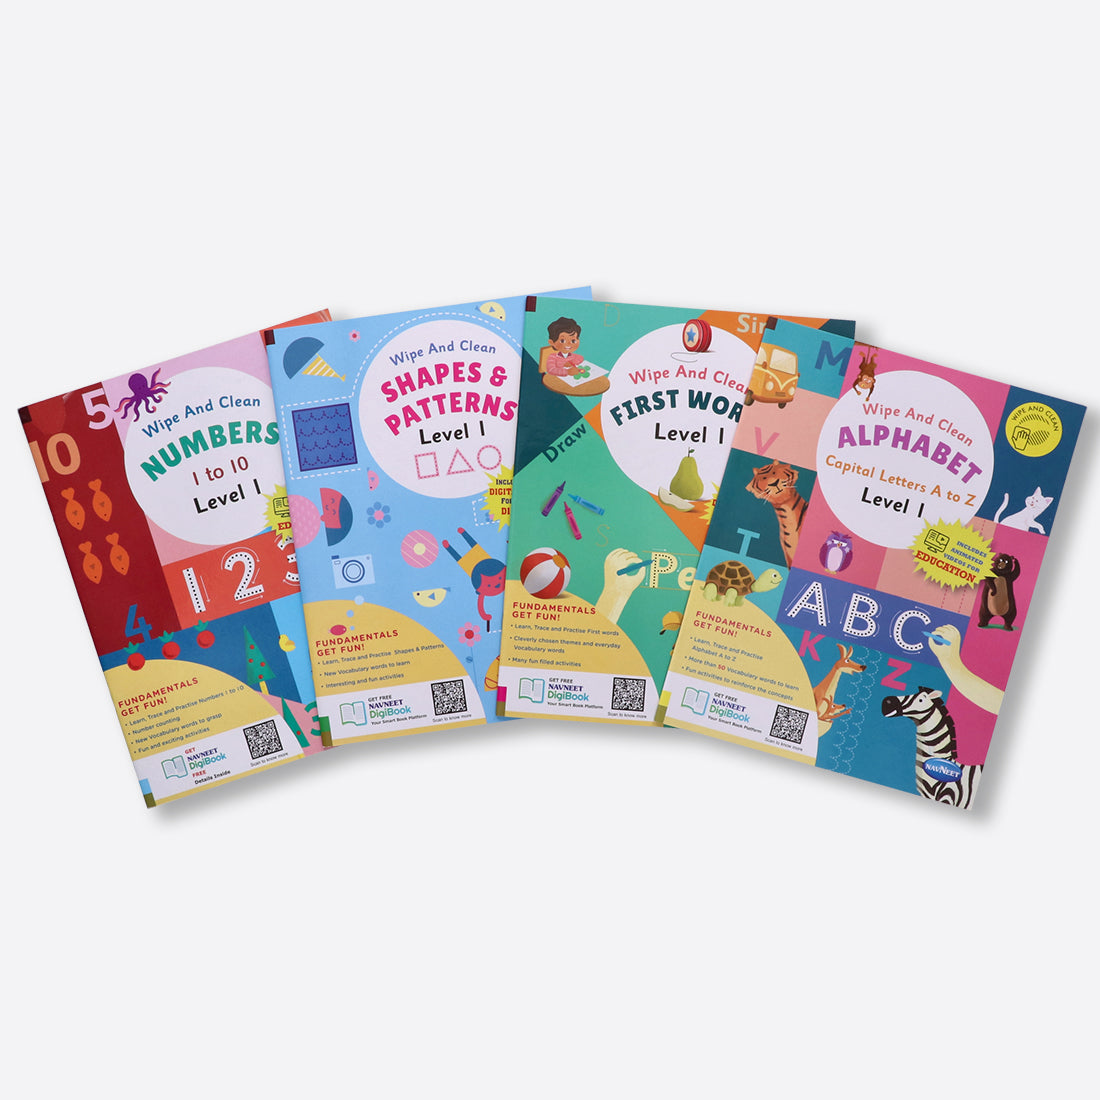 Navneet Wipe and Clean School readiness activity books - set of 4 - Alphabet A to Z, Numbers 1 to 10, First Words, Shapes & Patterns- Writing - Reusable Practice Books Level 1.